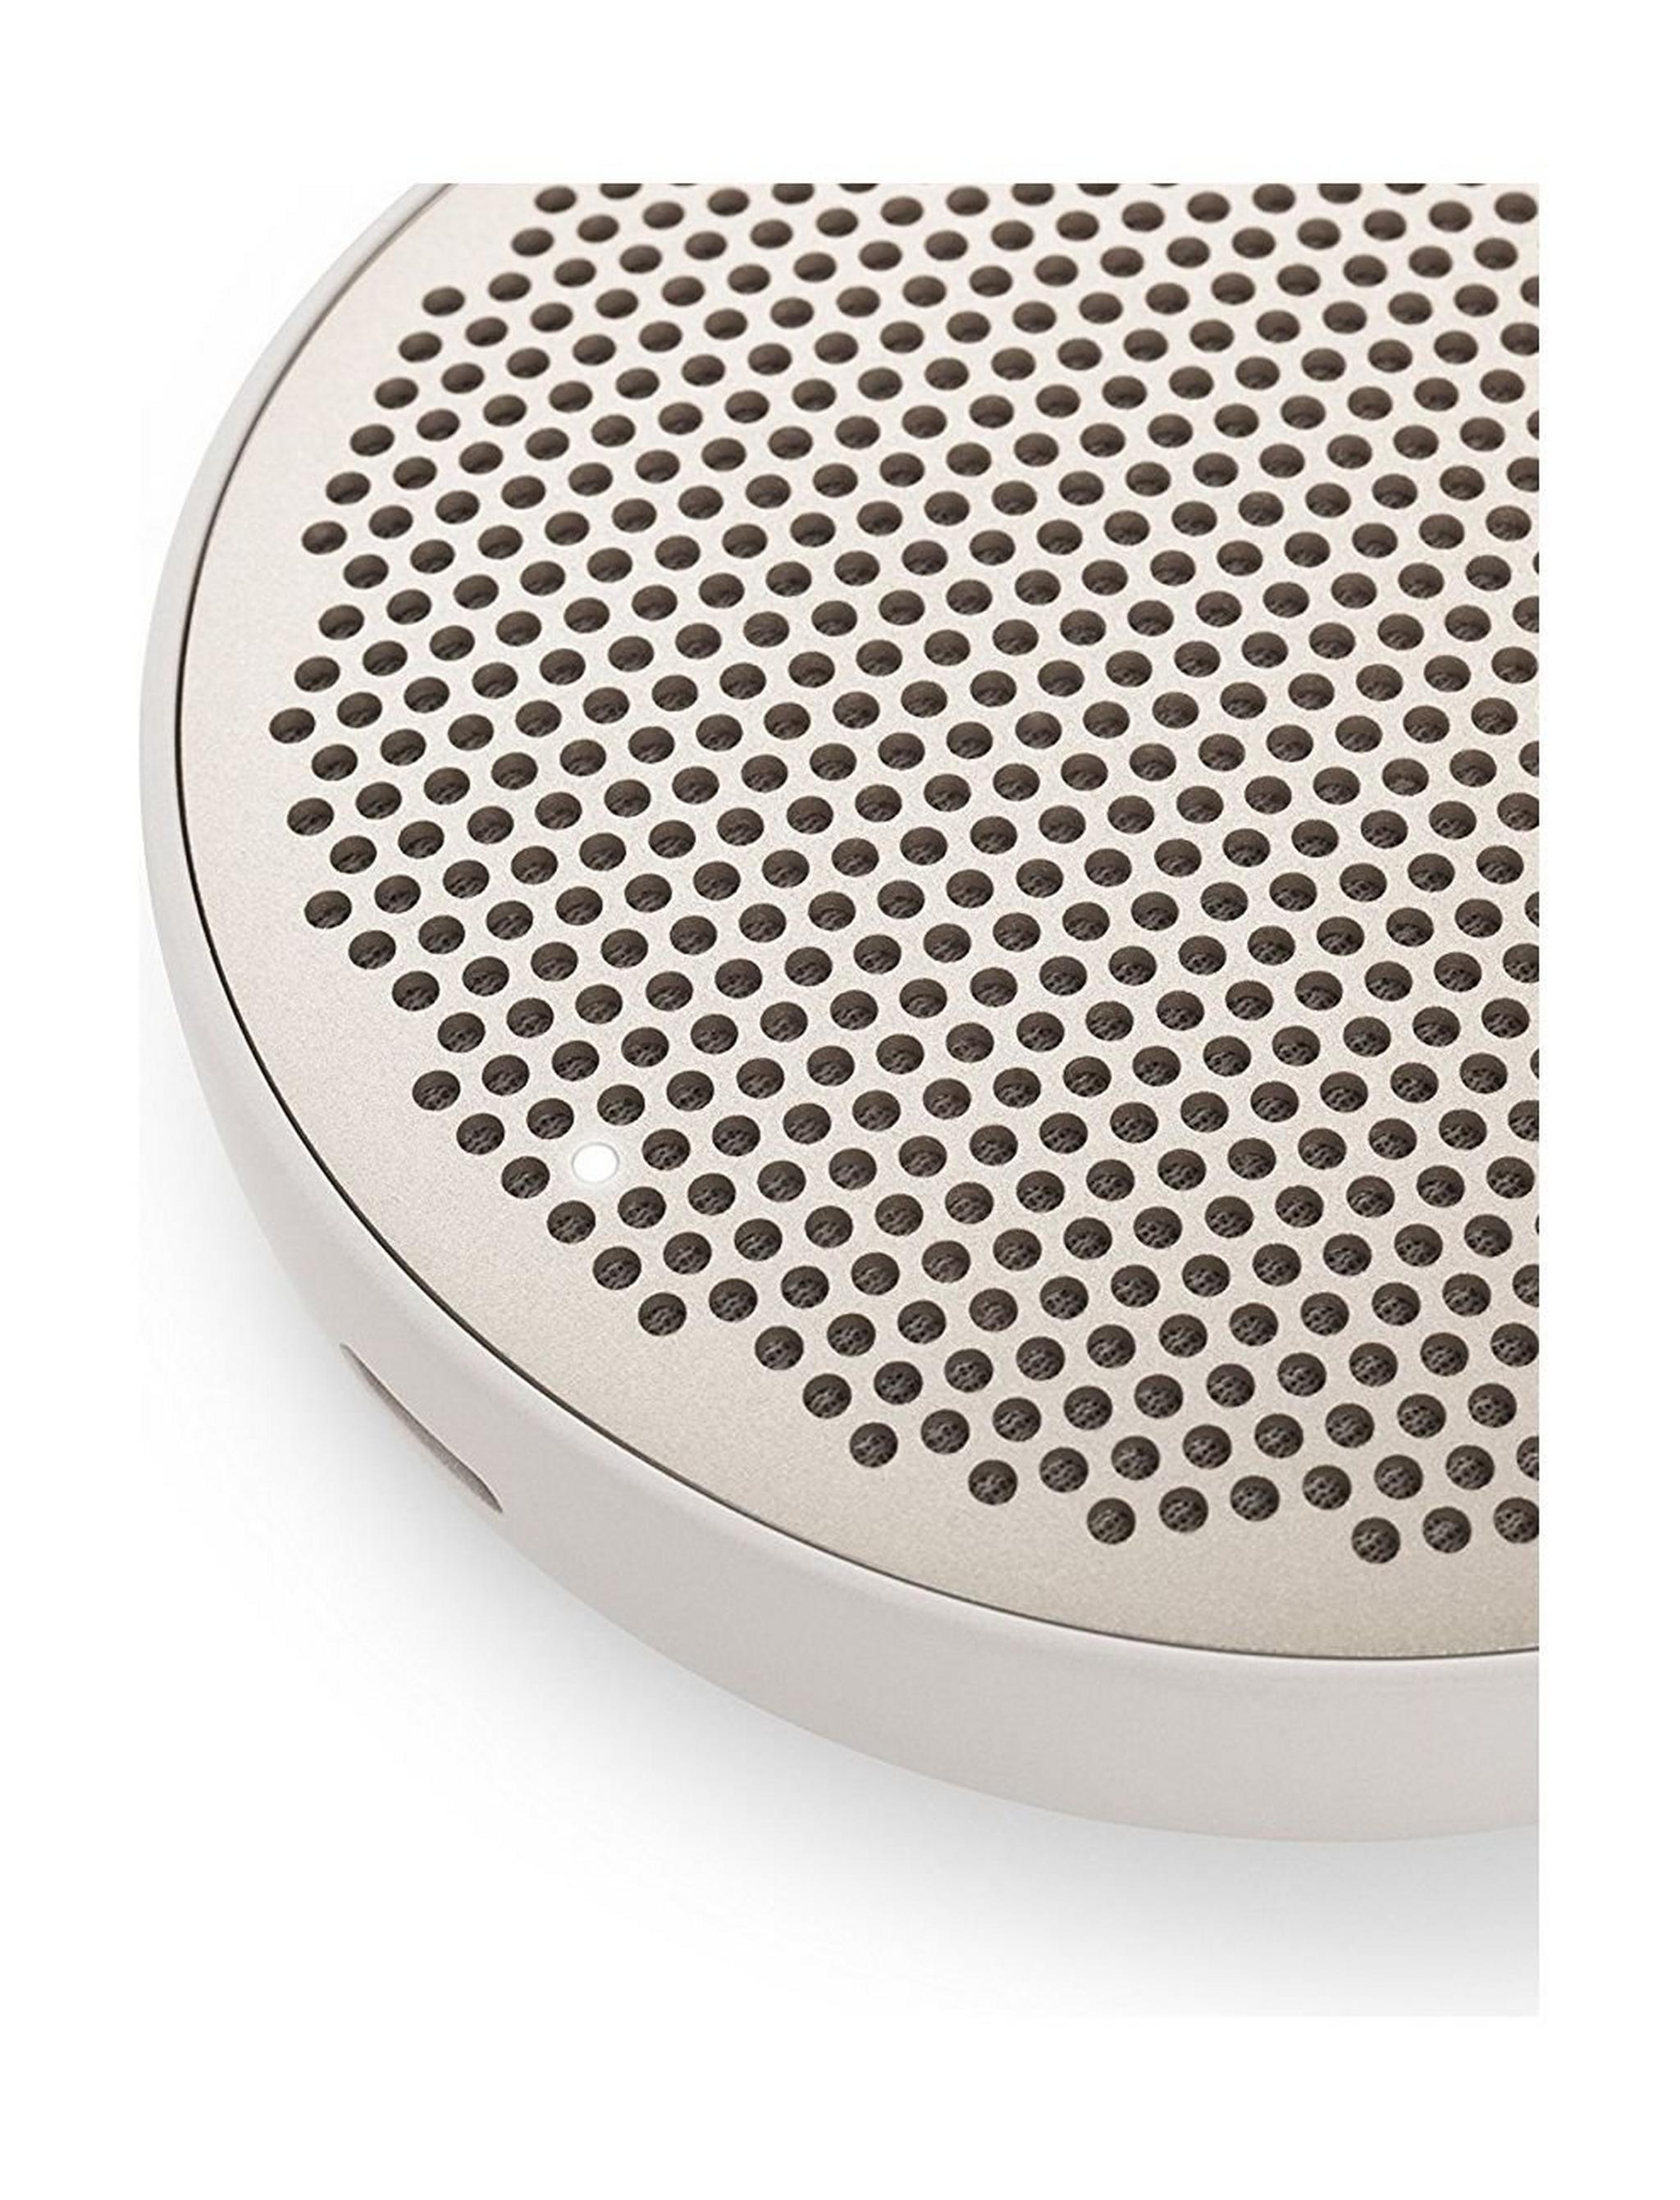 B&O PLAY by Bang & Olufsen Beoplay P2 Portable Bluetooth Speaker with Built-In Microphone - Sand Stone